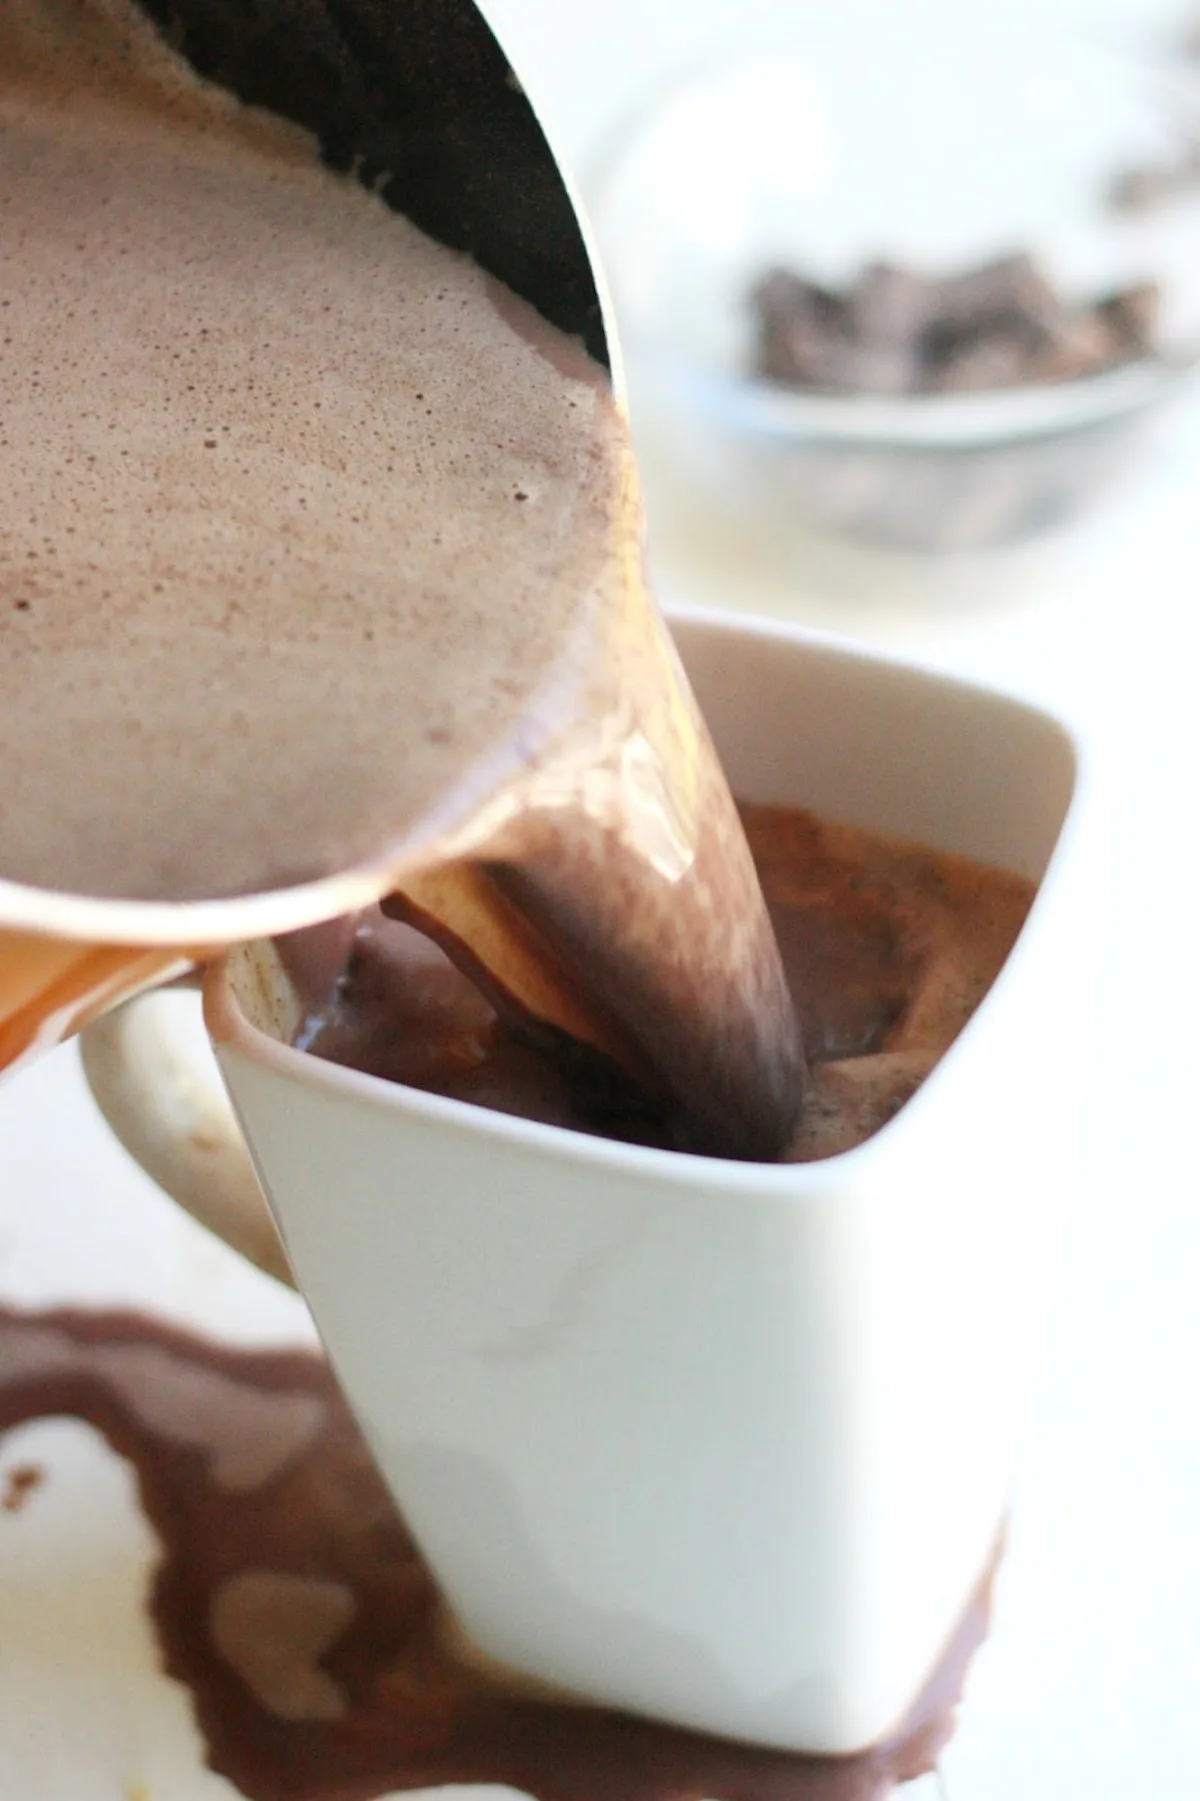 Pouring hot chocolate into a mug from a saucepan